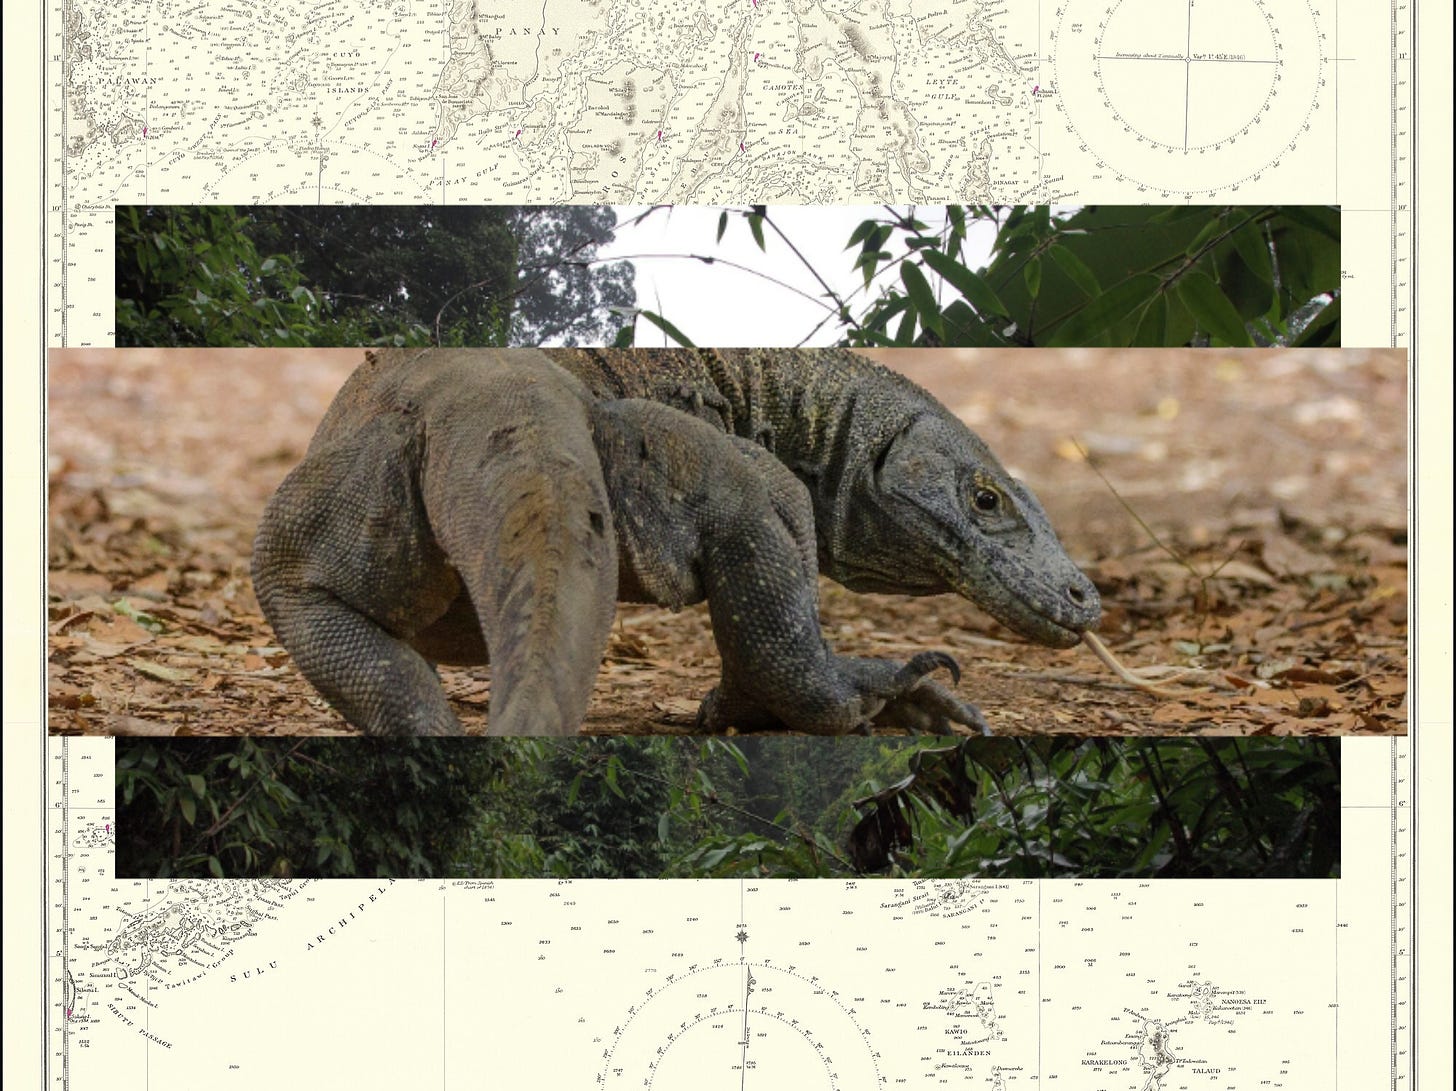 Collage of a creative commons komodo dragon pasted over a jungle scene pasted over a map of the South Asia Sea